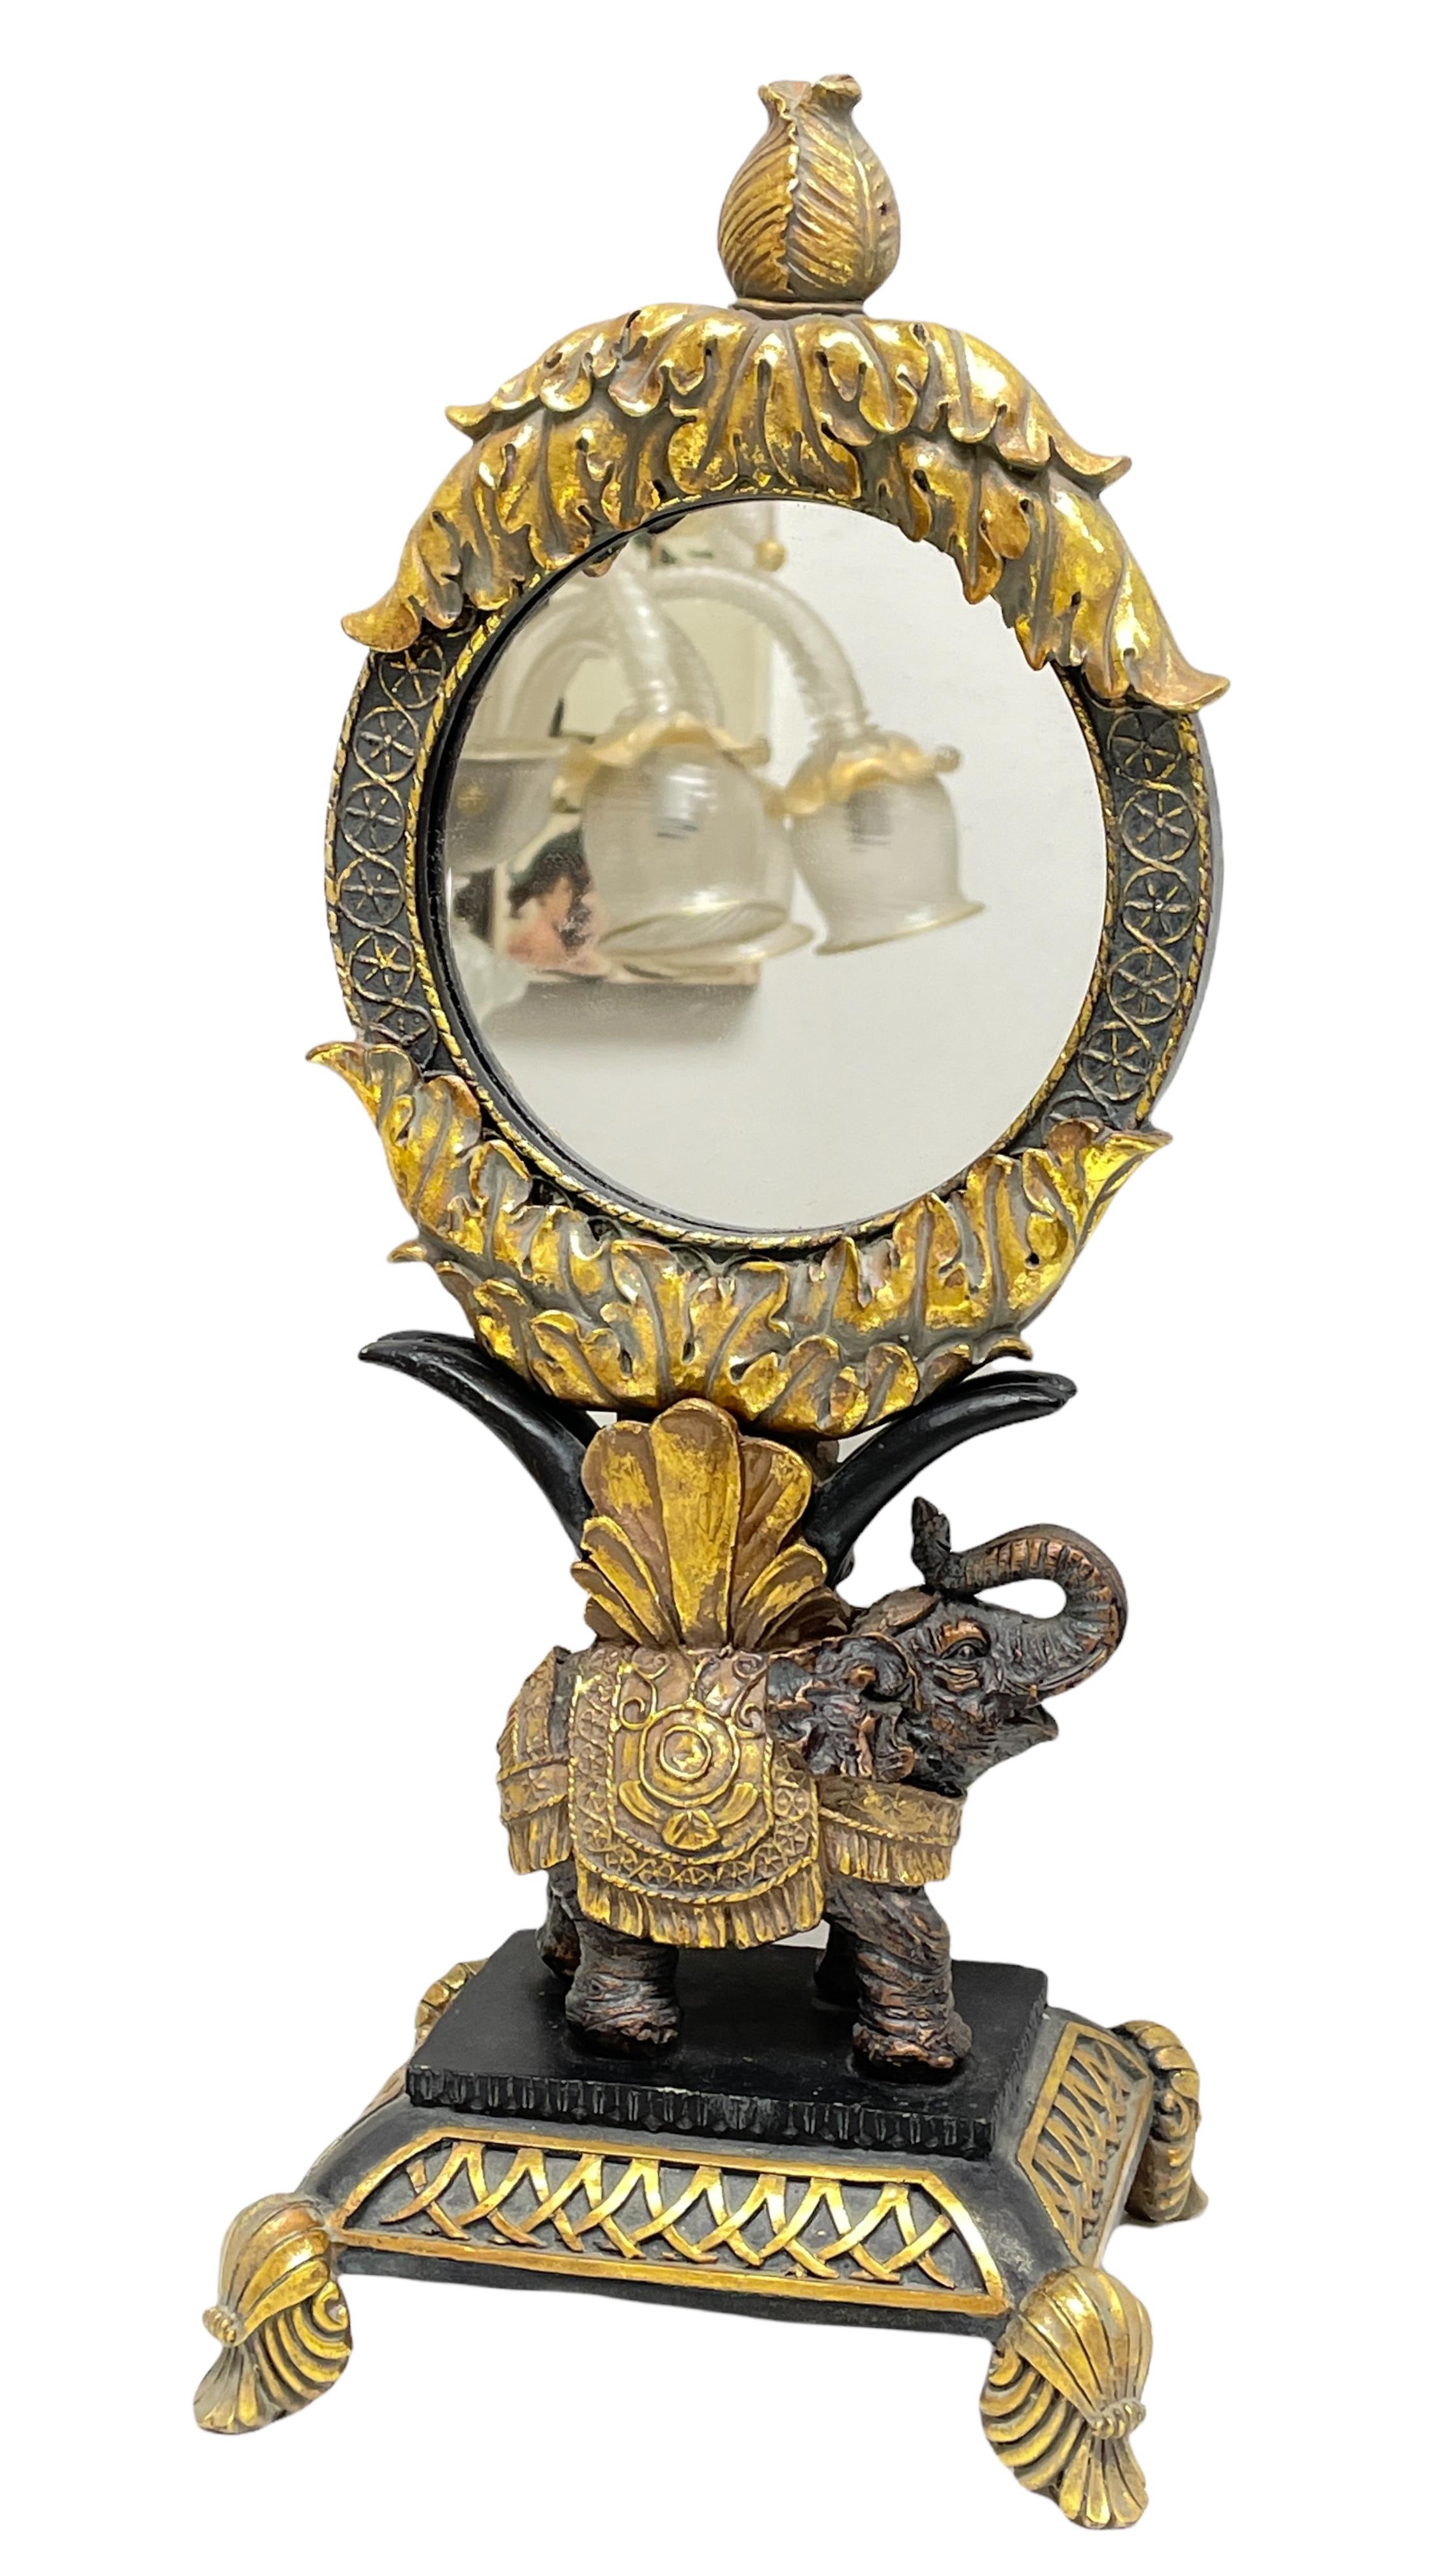 A gorgeous vanity mirror on a elephant stand. With minor signs of wear as expected with age and use. A nice addition to any room.